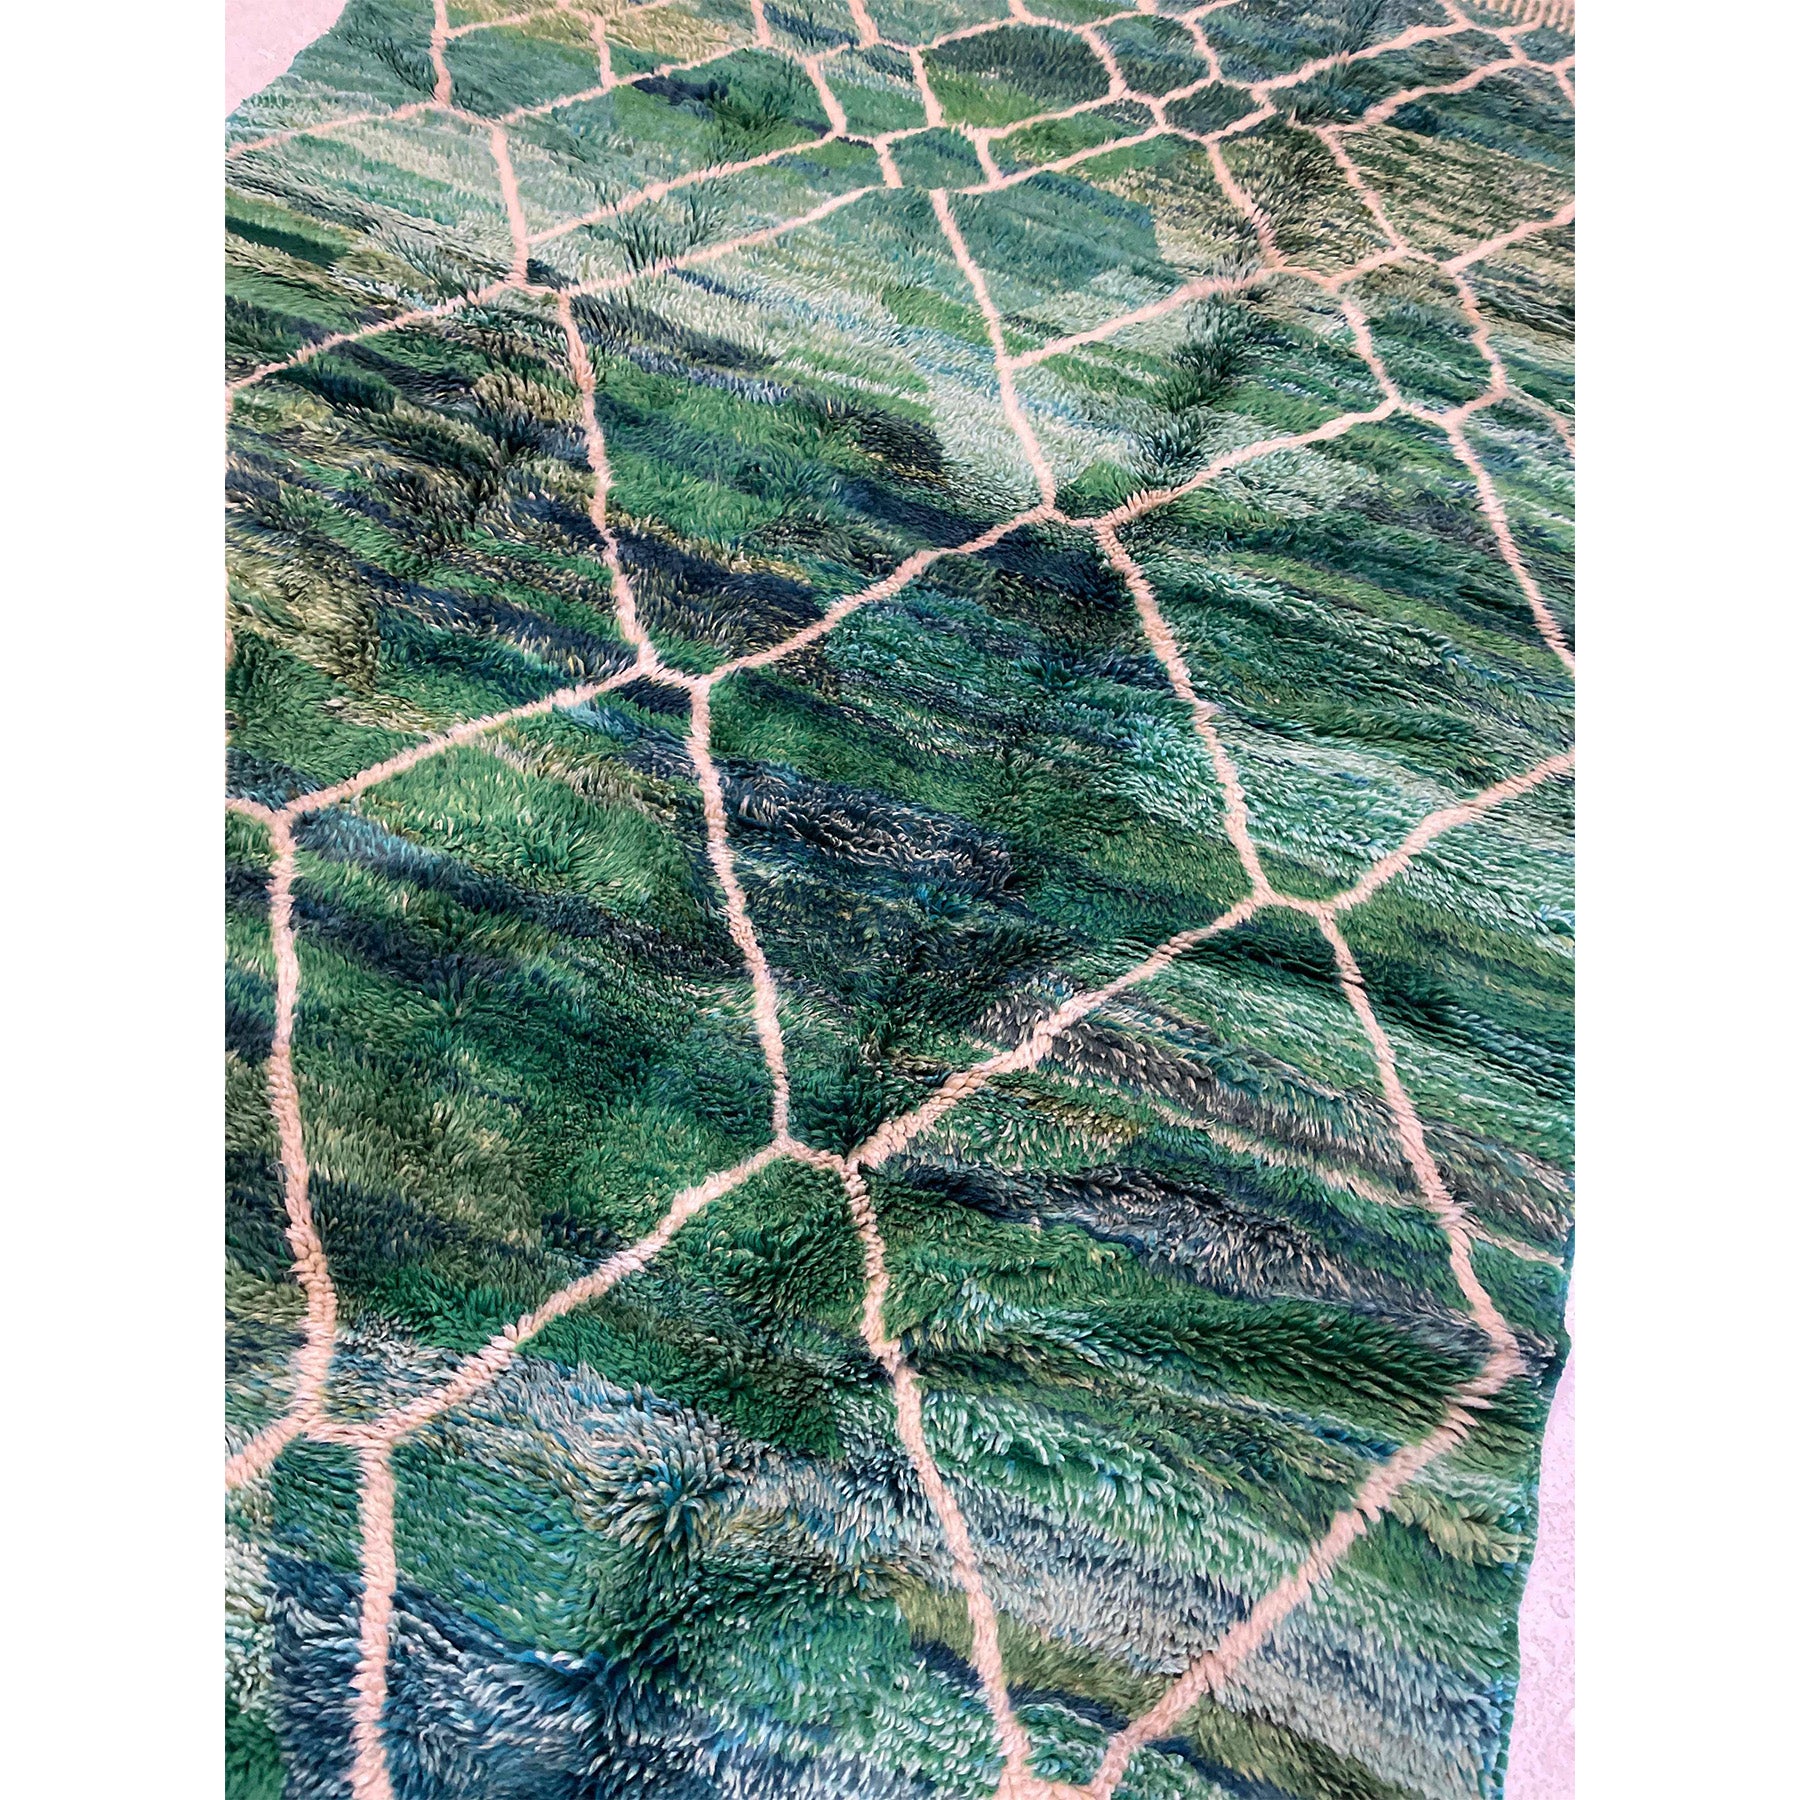 closeup of Beni Ourain style Moroccan rug with contemporary green and blue ombre details  | Kantara Moroccan Rugs in Los Angeles at The Rug Shop